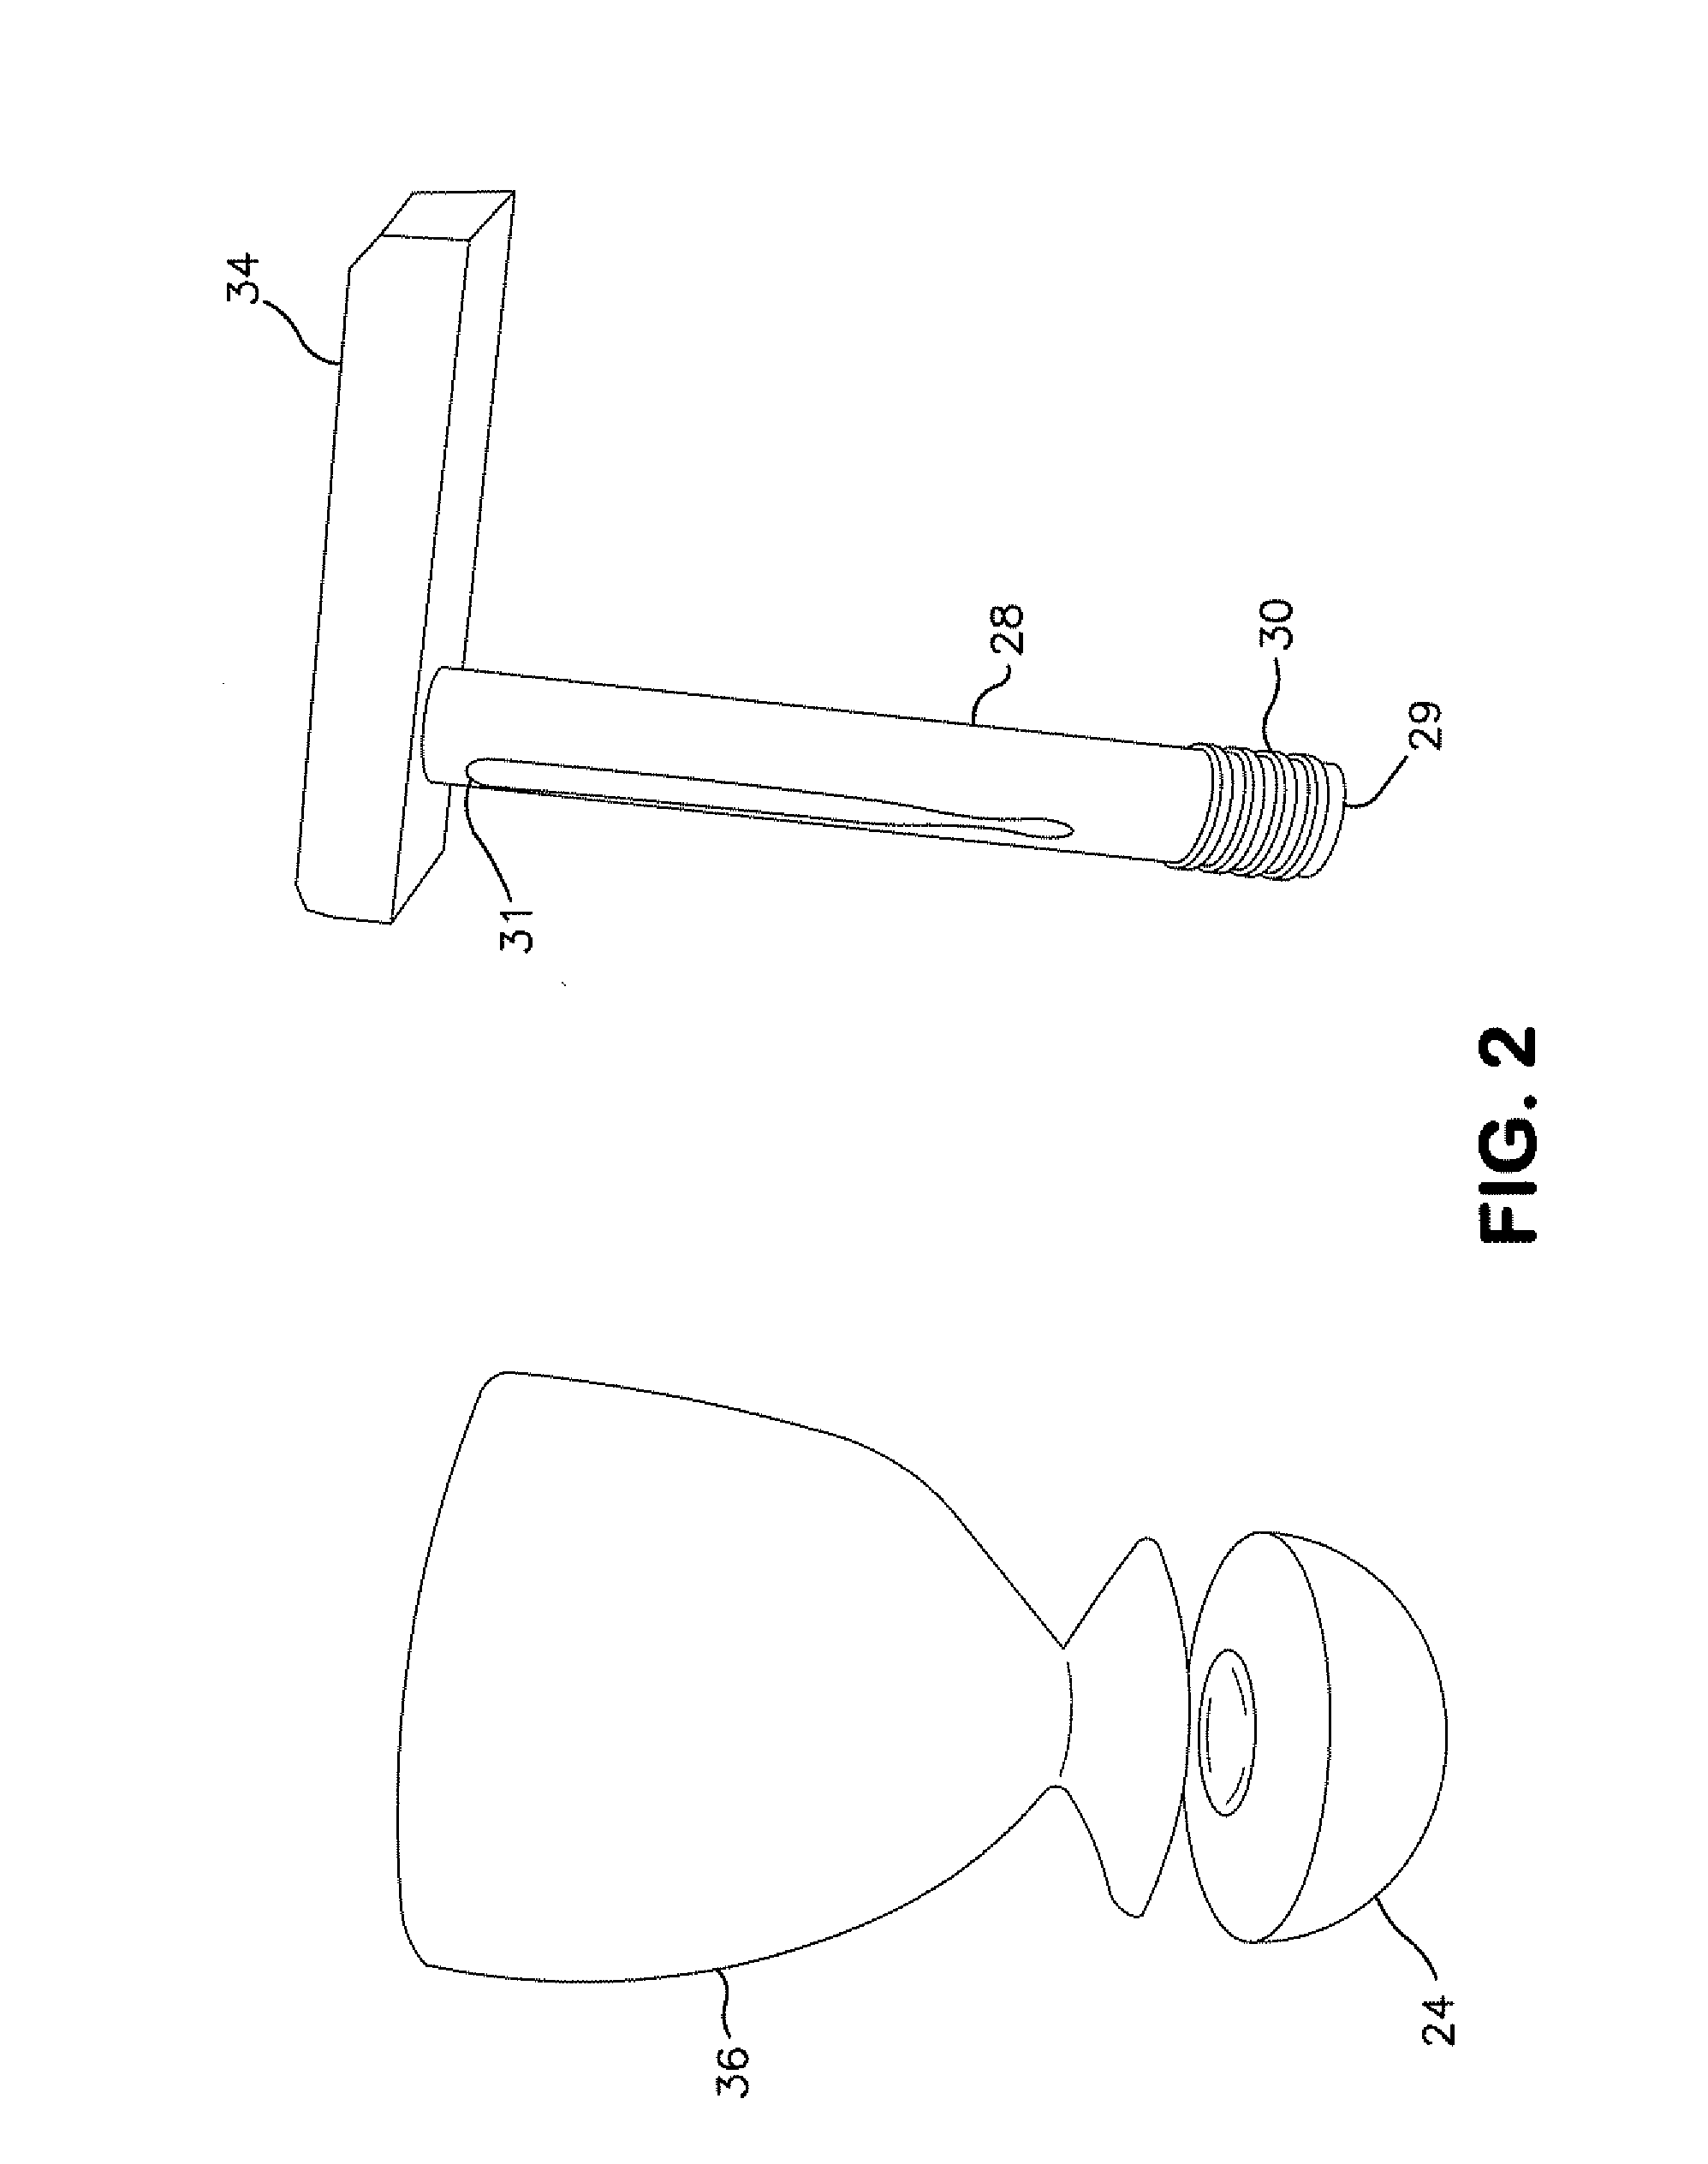 Thumb worn tap devices and storage holders for use with handheld electronics